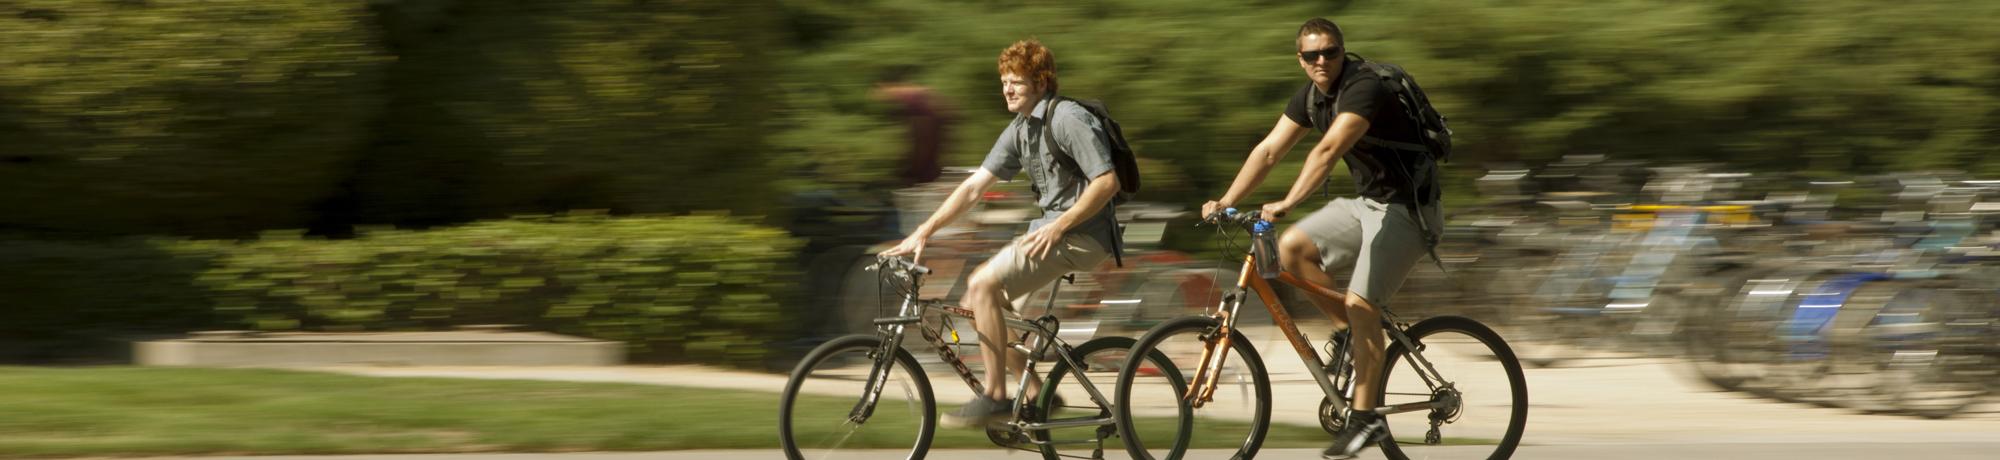 two students riding bikes on campus